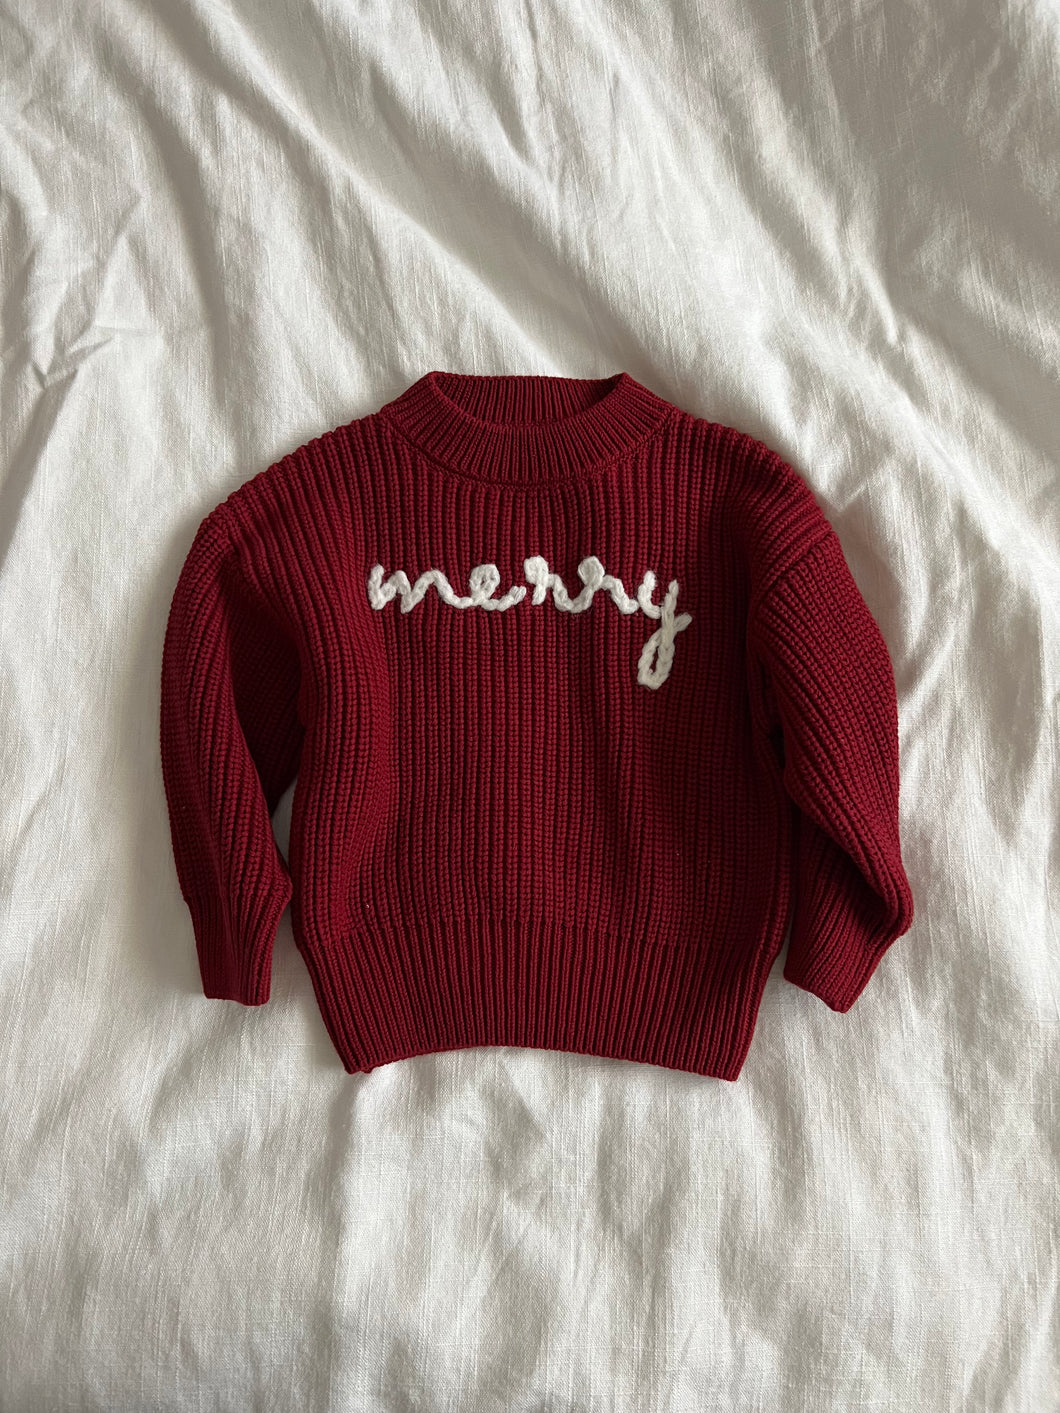 Merry embroidered sweater